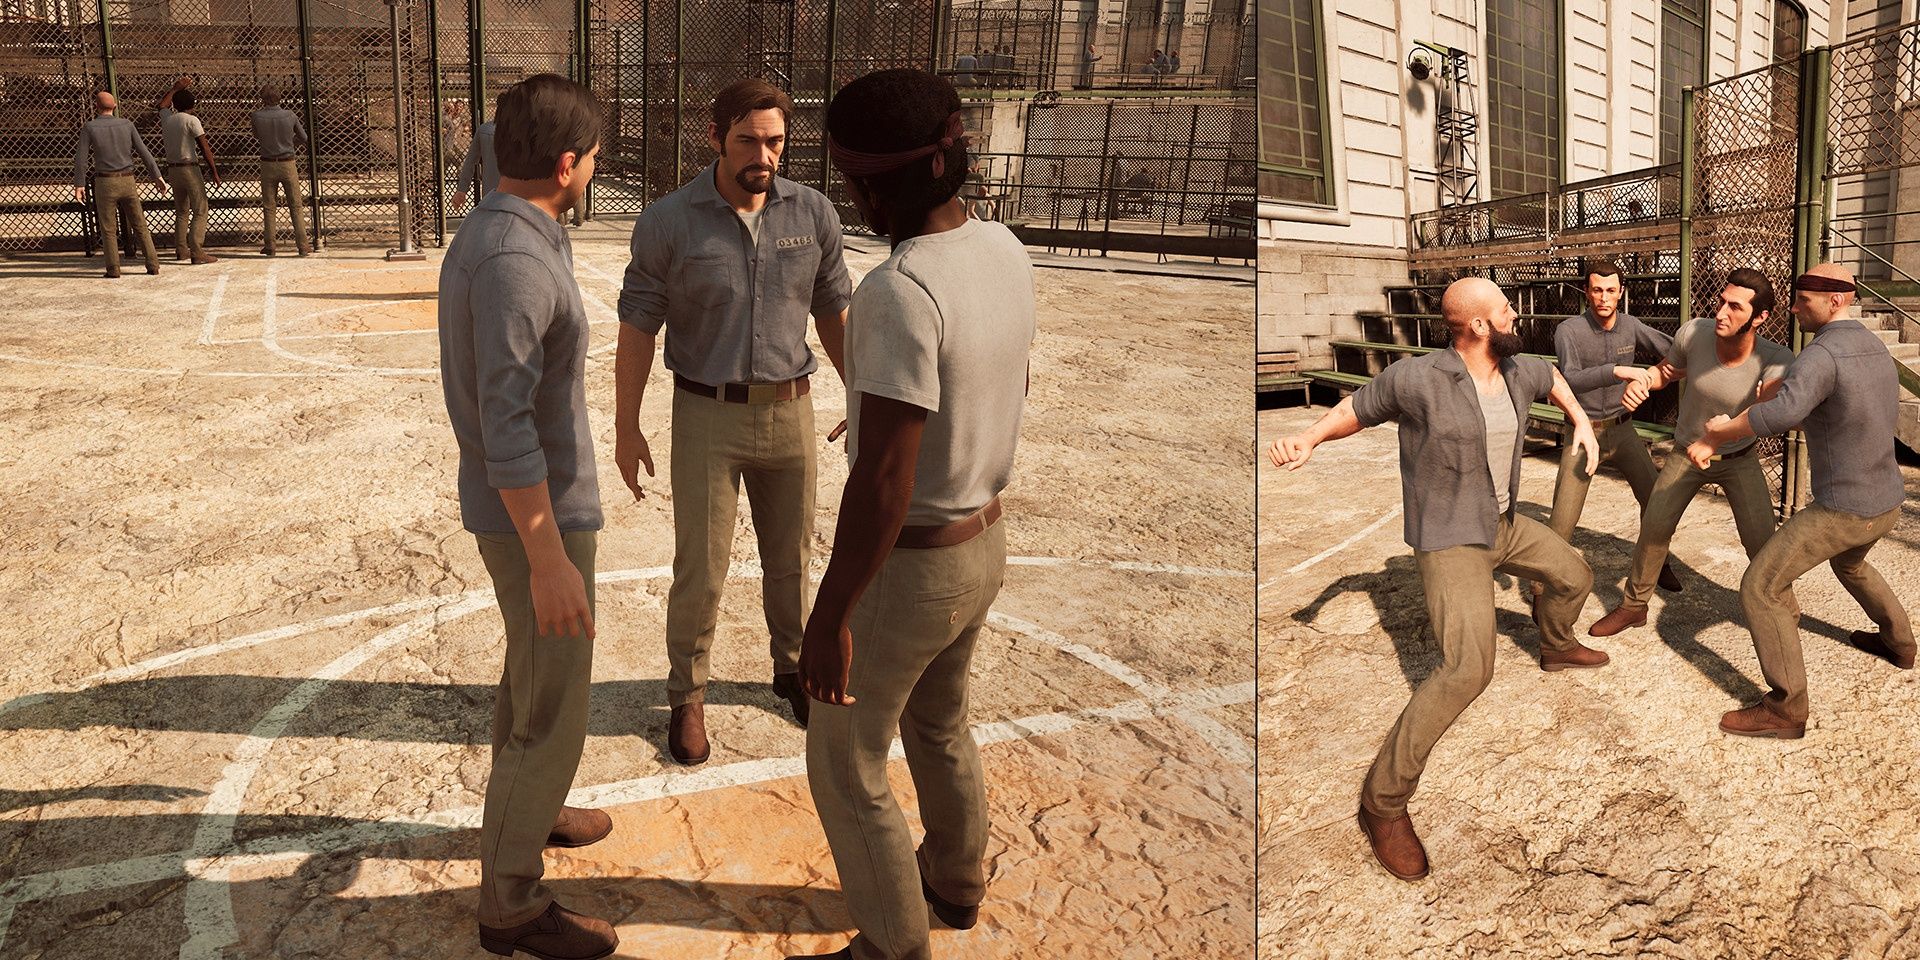 Vincent chatting while Leo fights at the prison yard in A Way Out